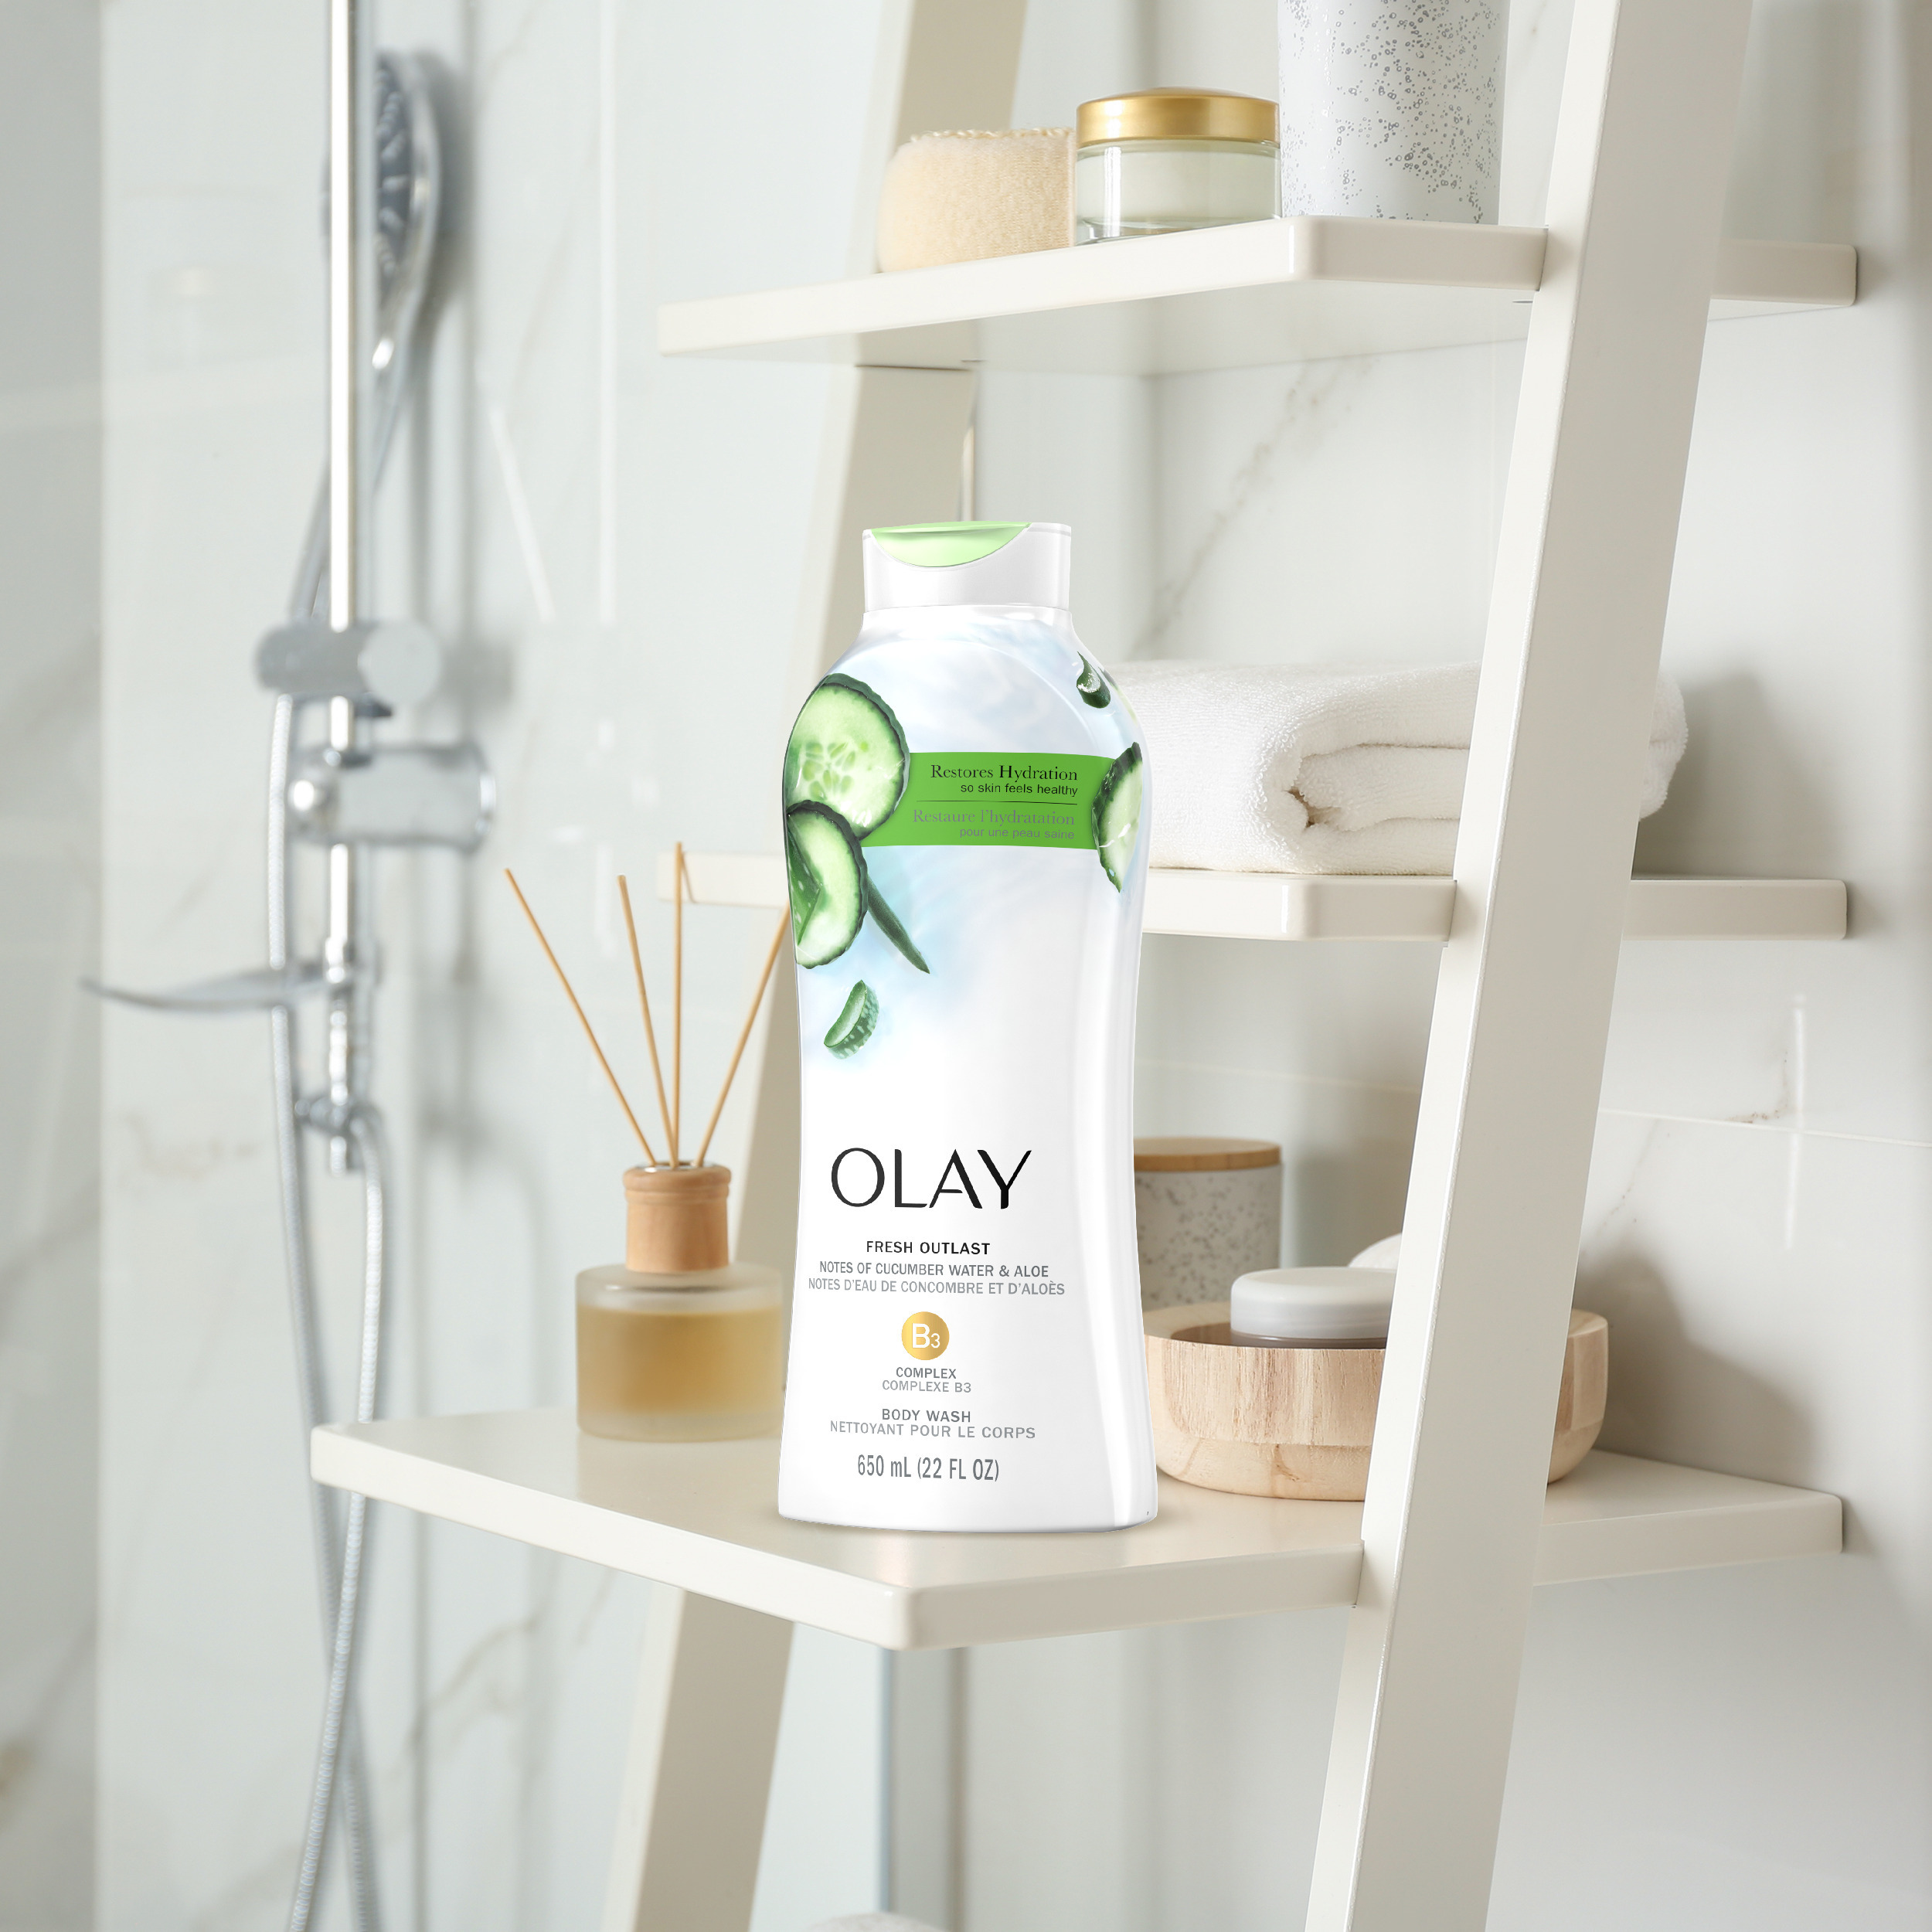 Olay Fresh Outlast Body Wash with Notes of Cucumber and Aloe, 22 fl oz - image 3 of 11